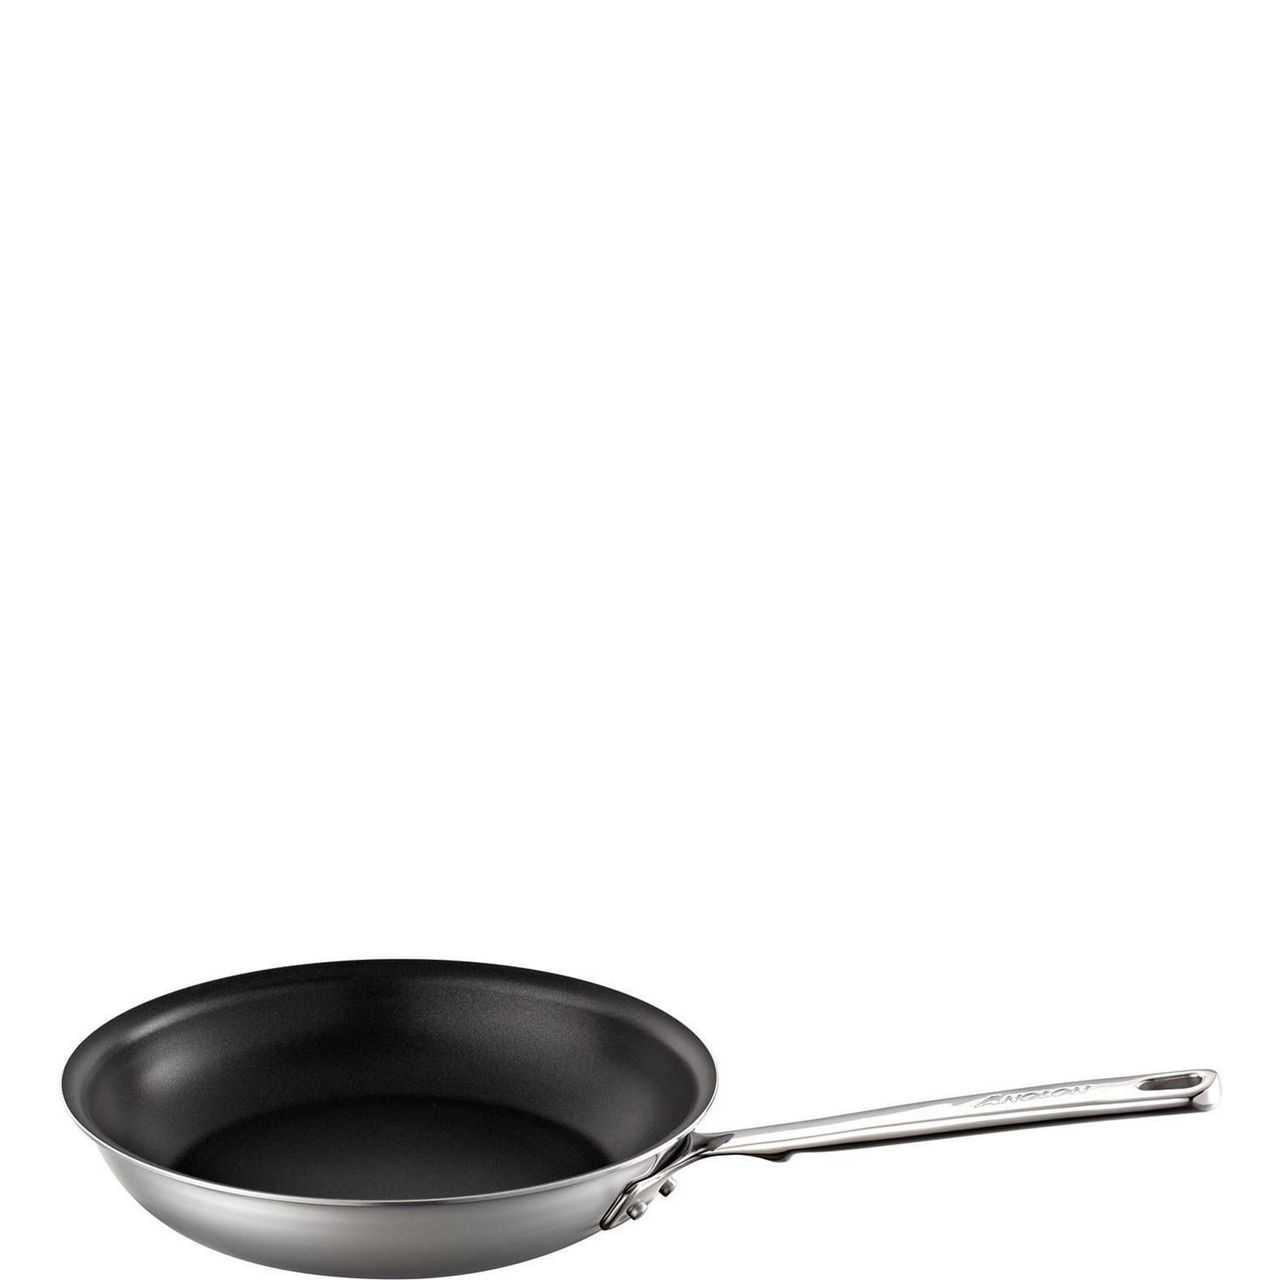 Bialetti Chef's Pan - Black, 12 in - Fred Meyer